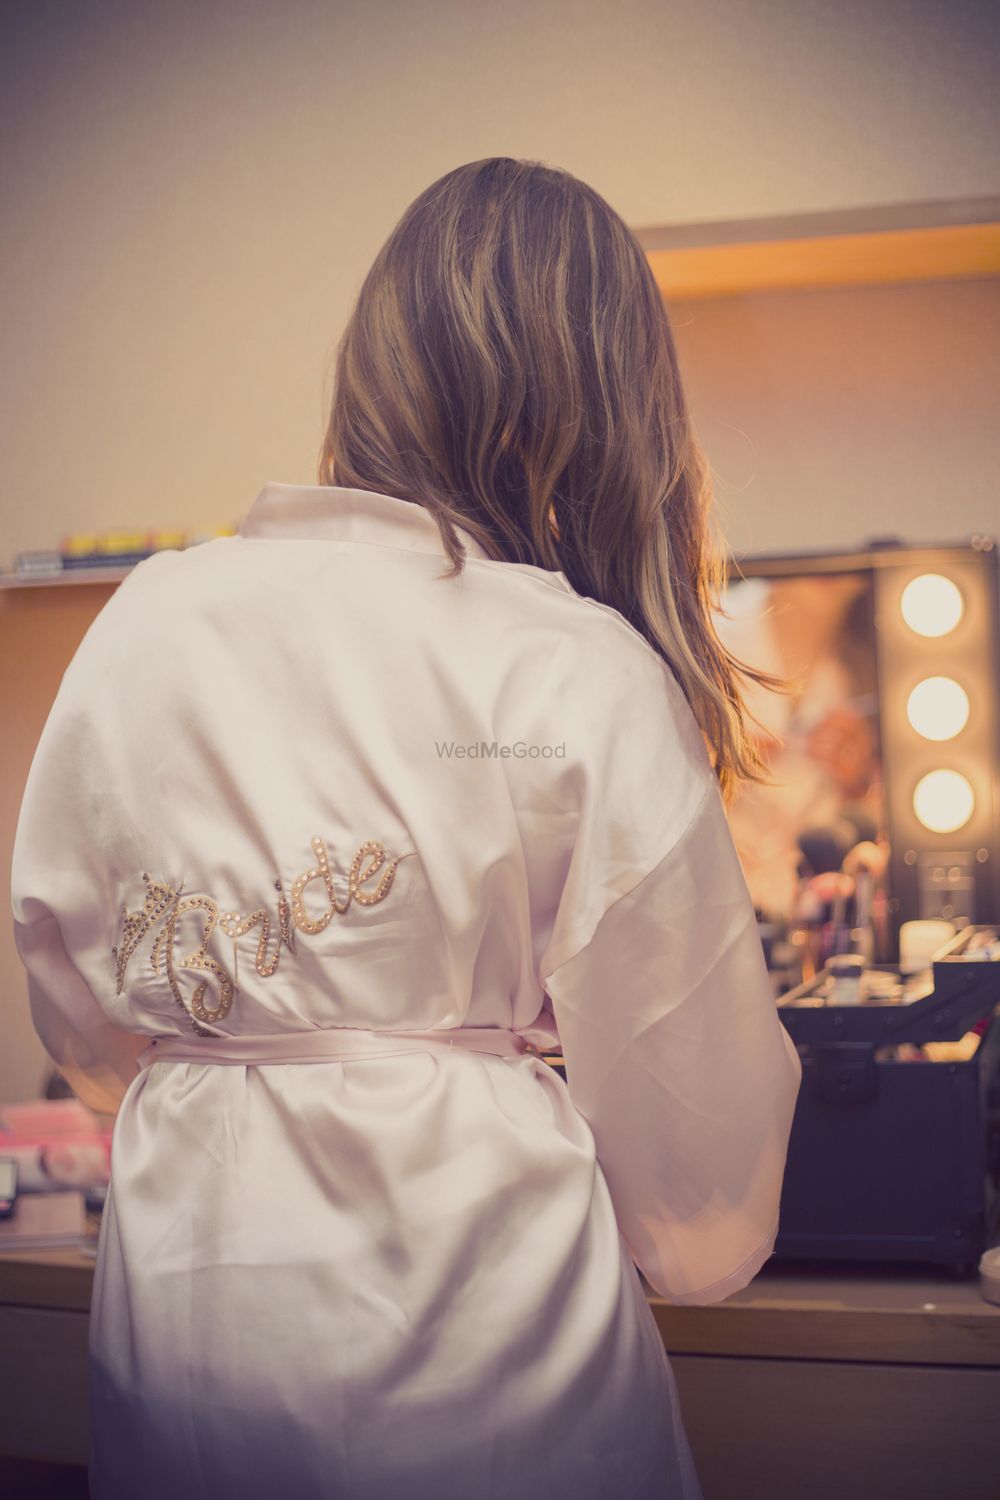 Photo of Bride getting ready shot wearing white robe